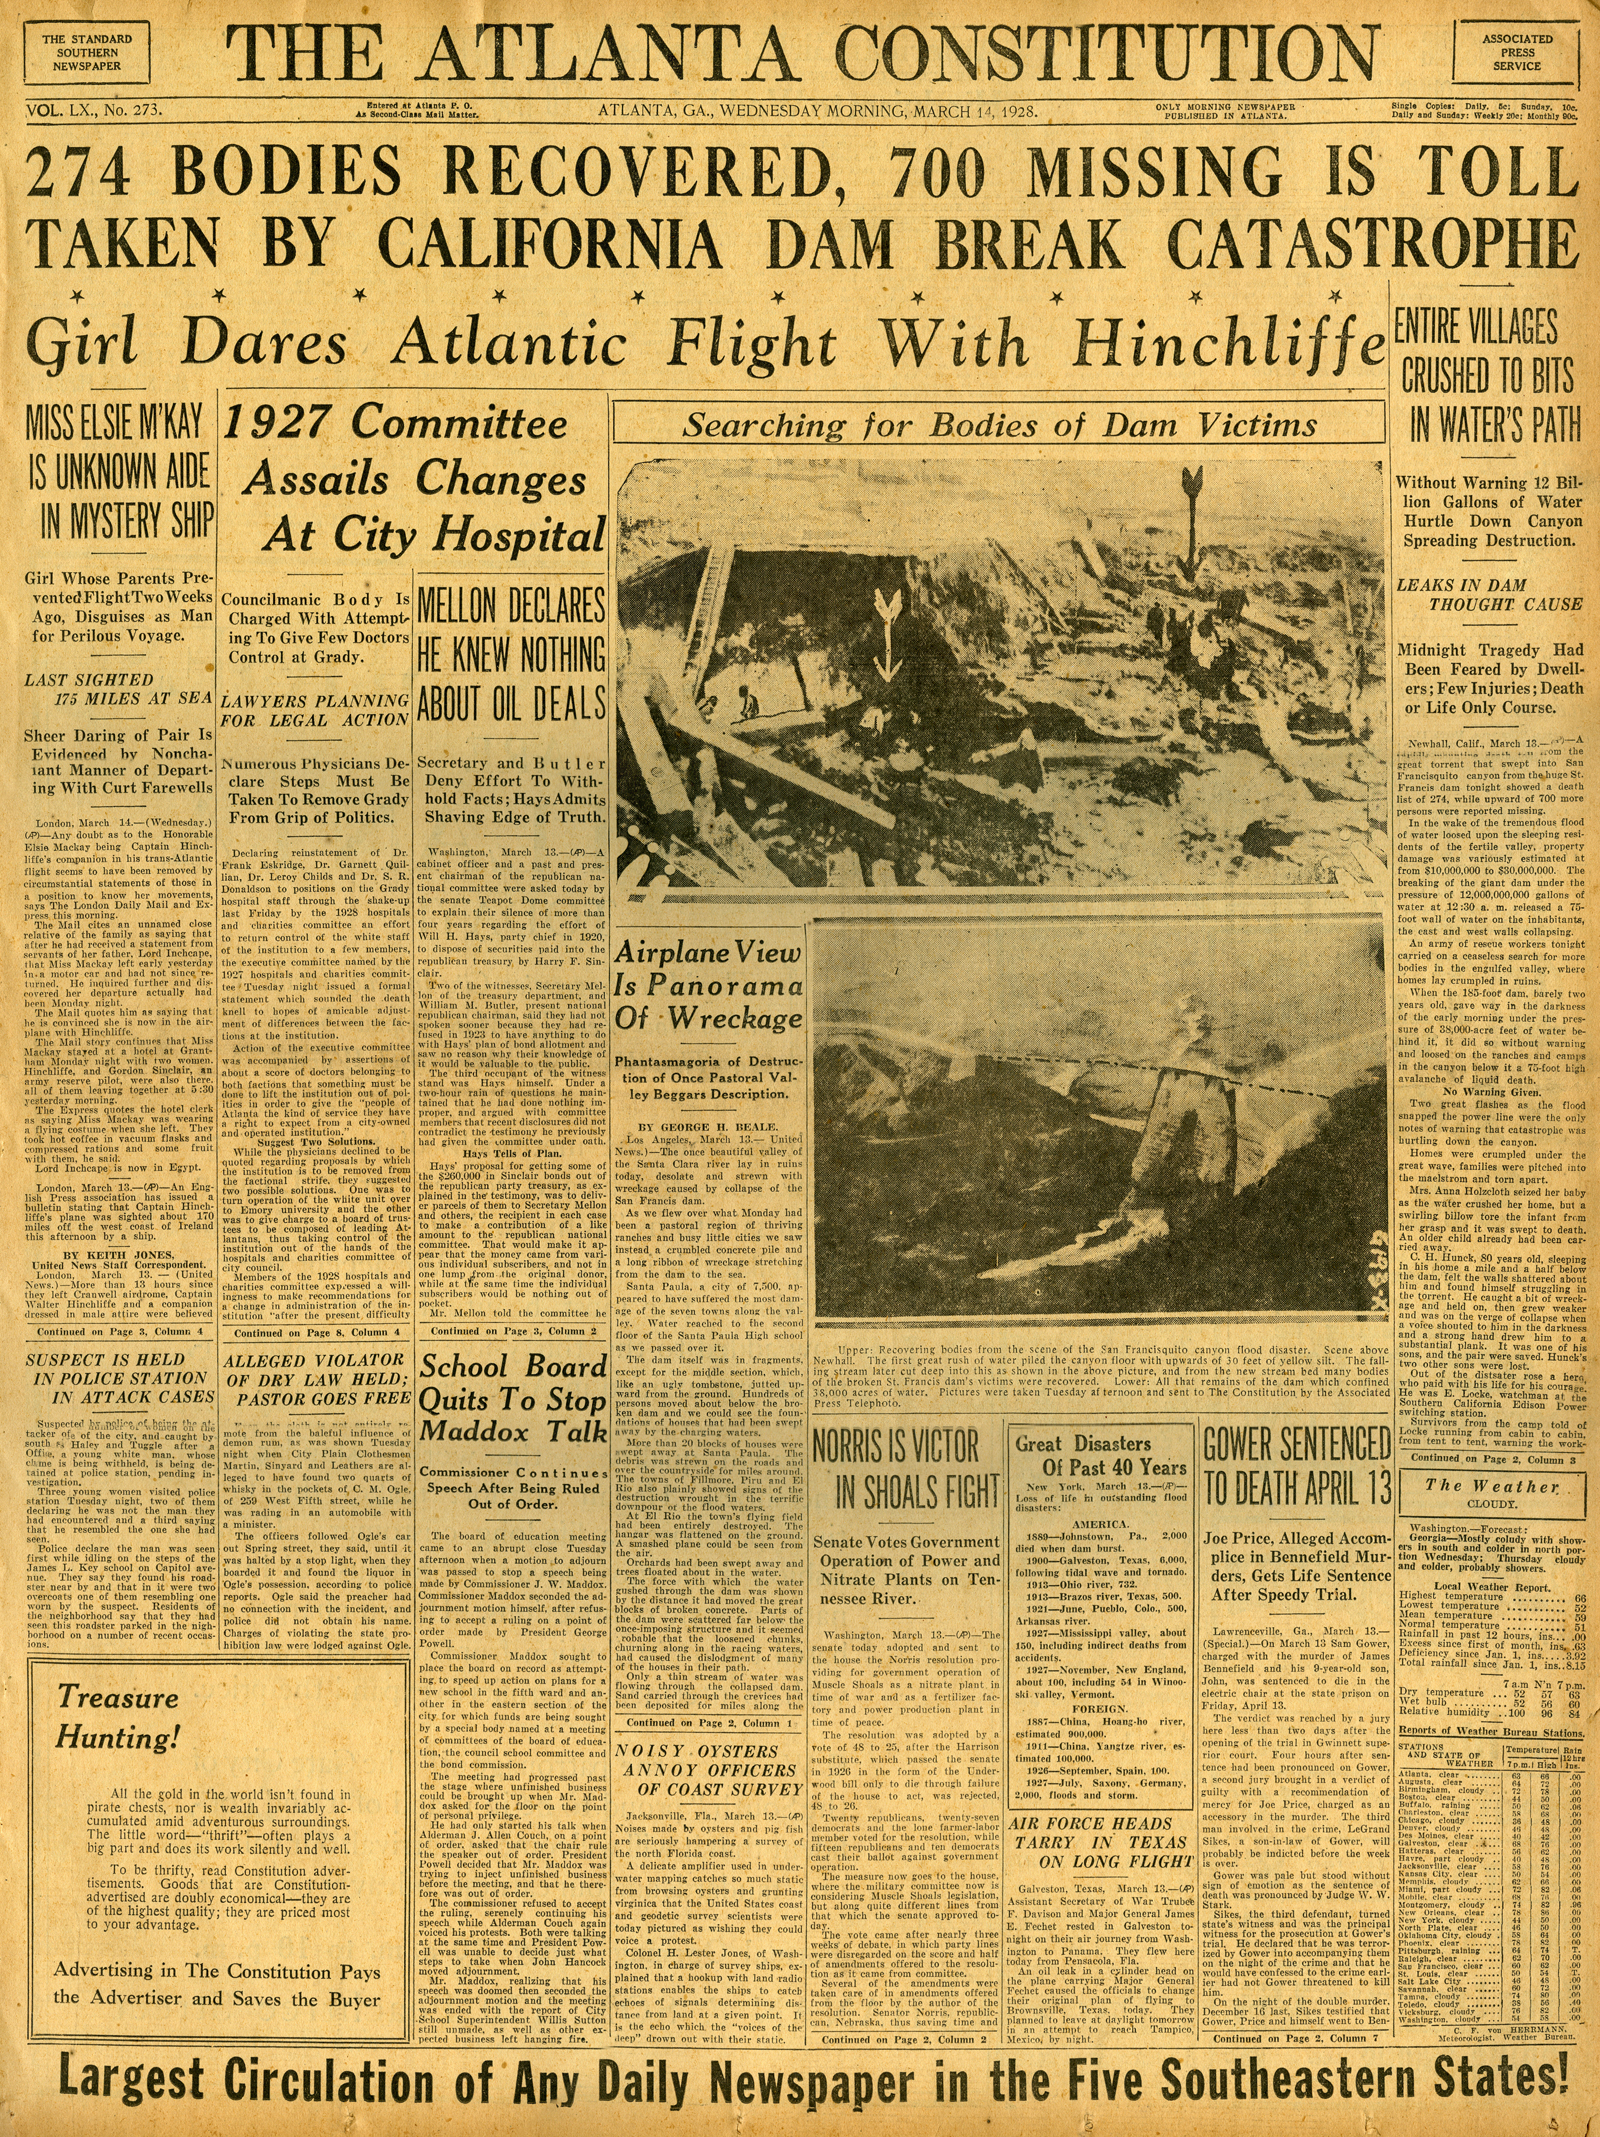 St. Francis Dam Disaster.

THE ATLANTA CONSTITUTION(NEWSPAPER),

WEDNESDAY, MARCH 14, 1928